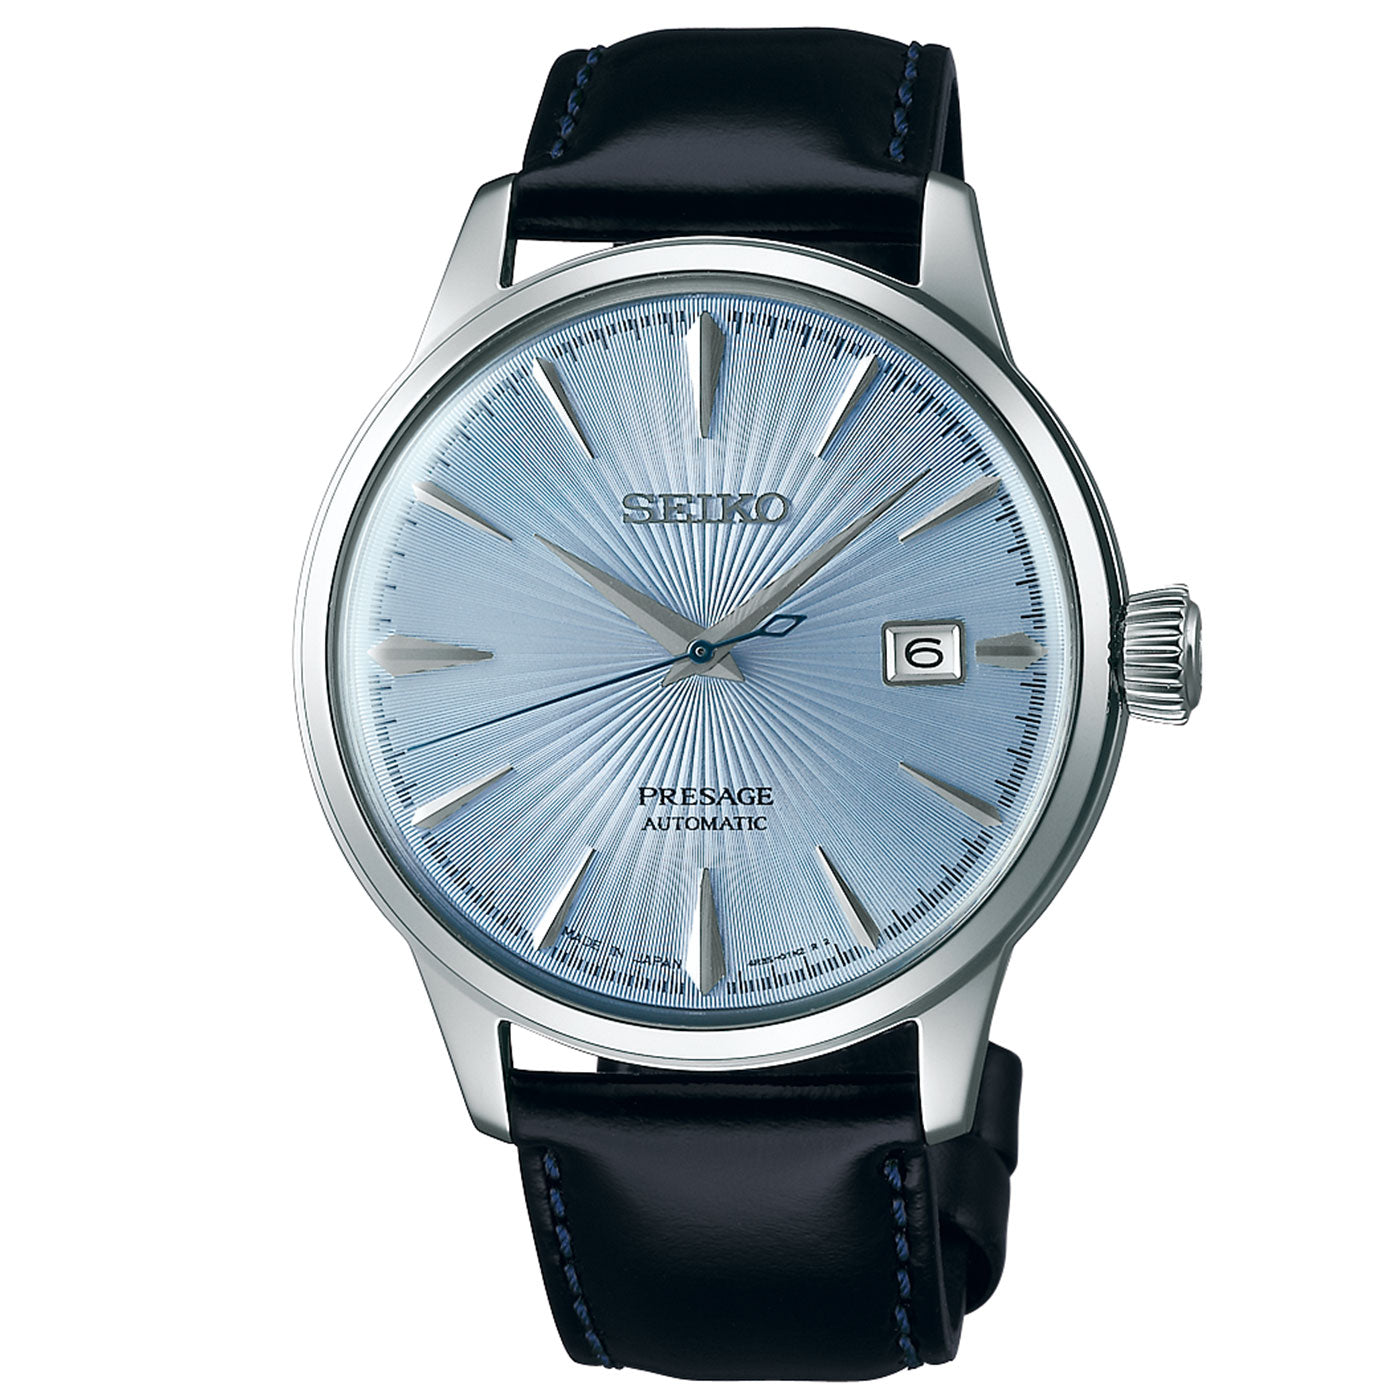 Seiko Presage Cocktail Time Automatic With Manual Winding 30.8mm Watch